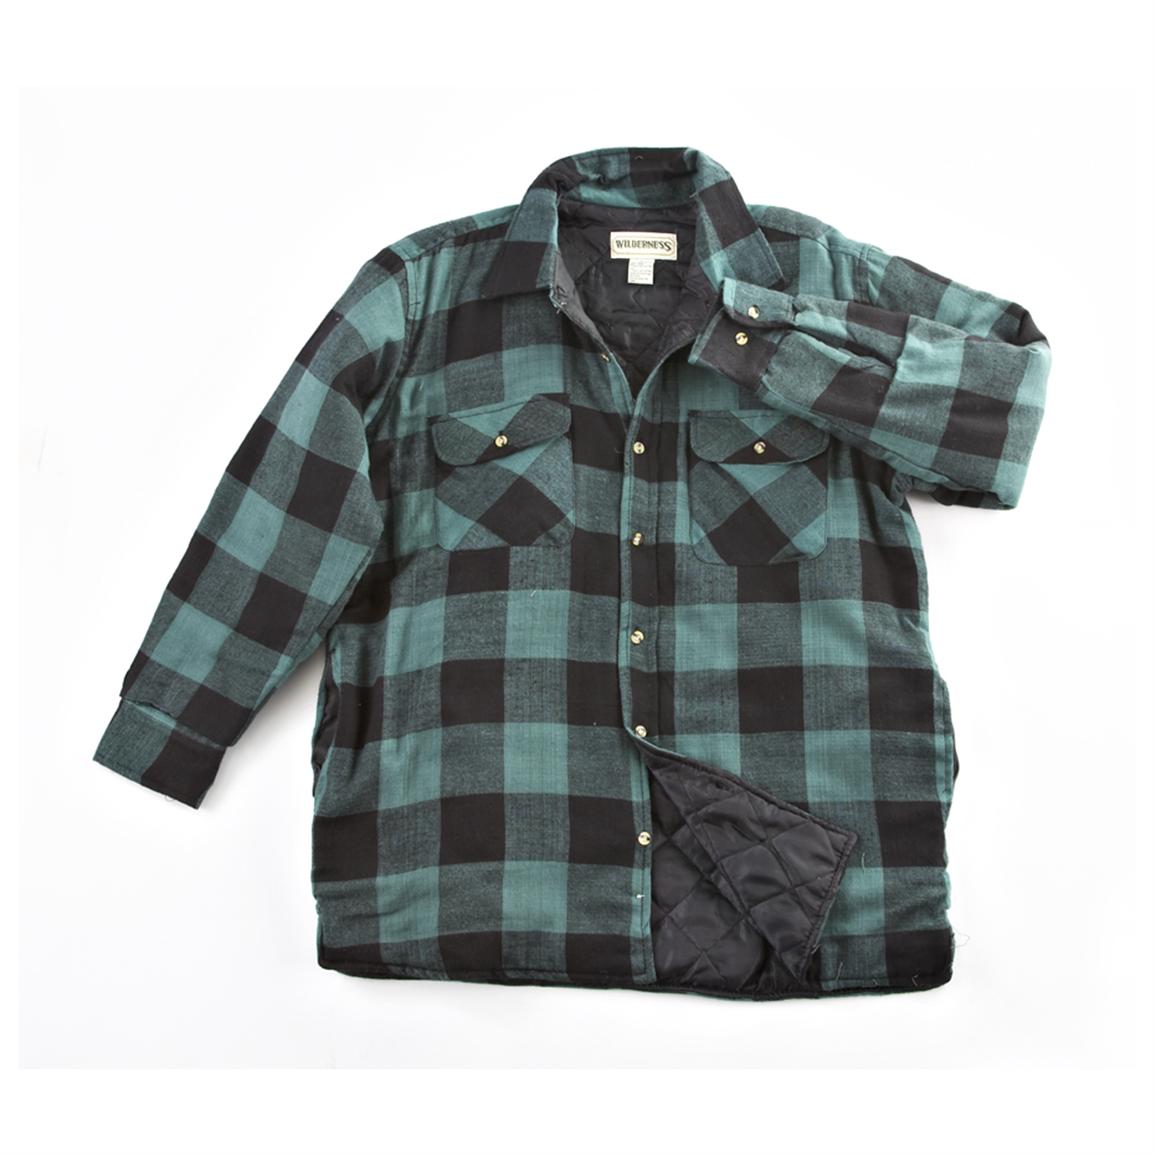 Insulated Plaid Shirt Jacket - 187152, Shirts & Polos at Sportsman's Guide